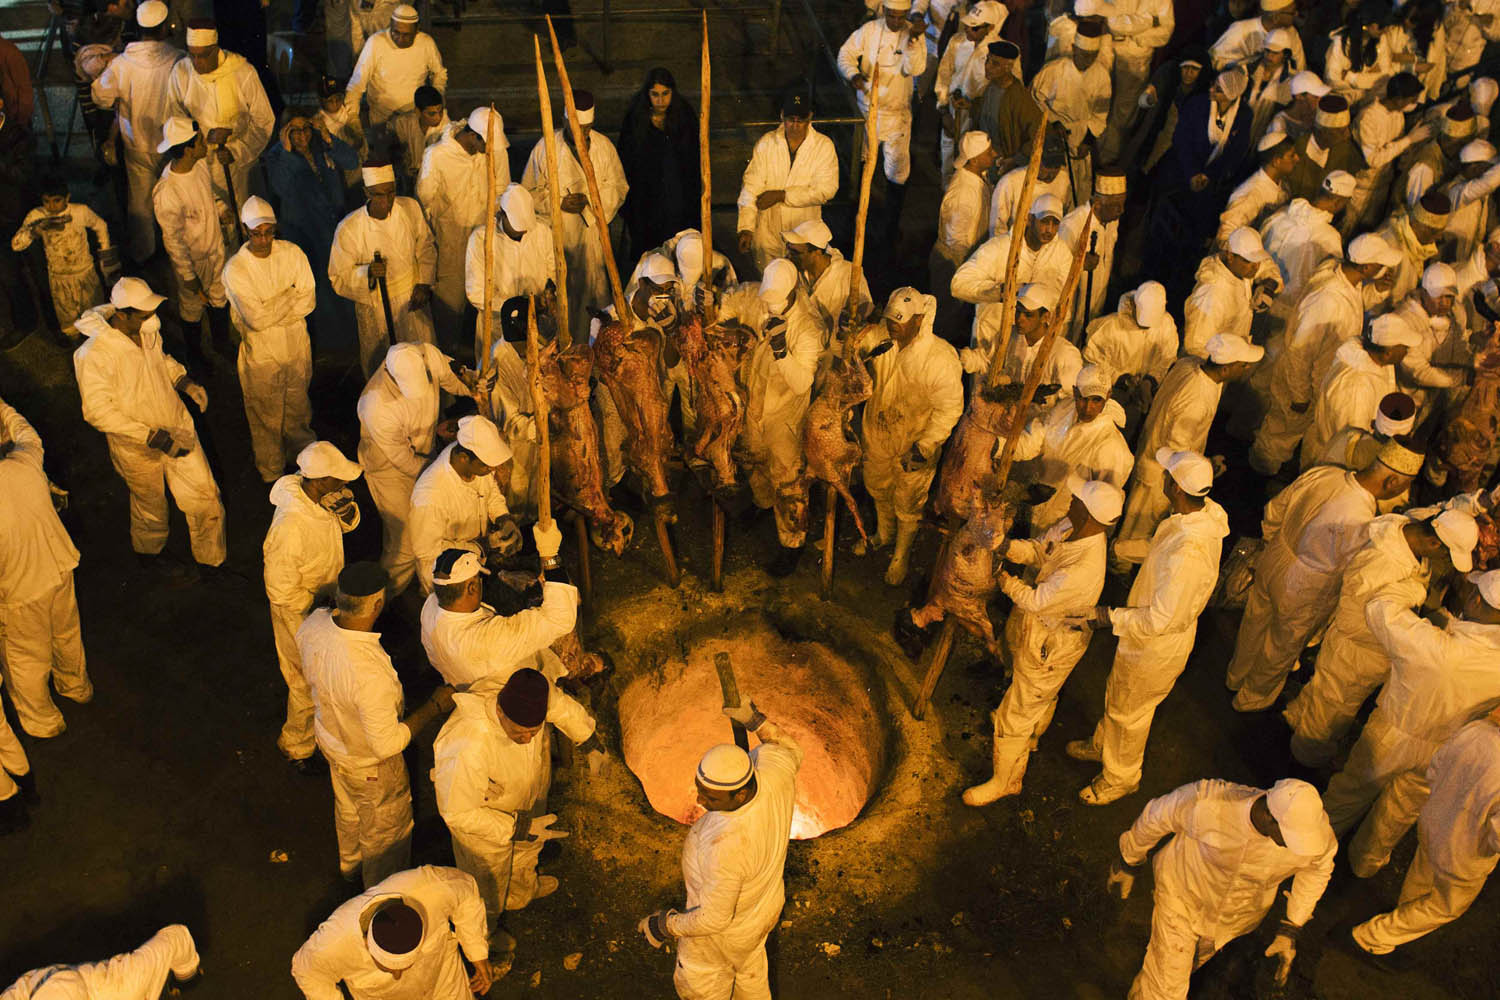 Members of the Samaritan sect place large sheep skewers into an oven during a traditional Passover sacrifice ceremony on Mount Gerizim